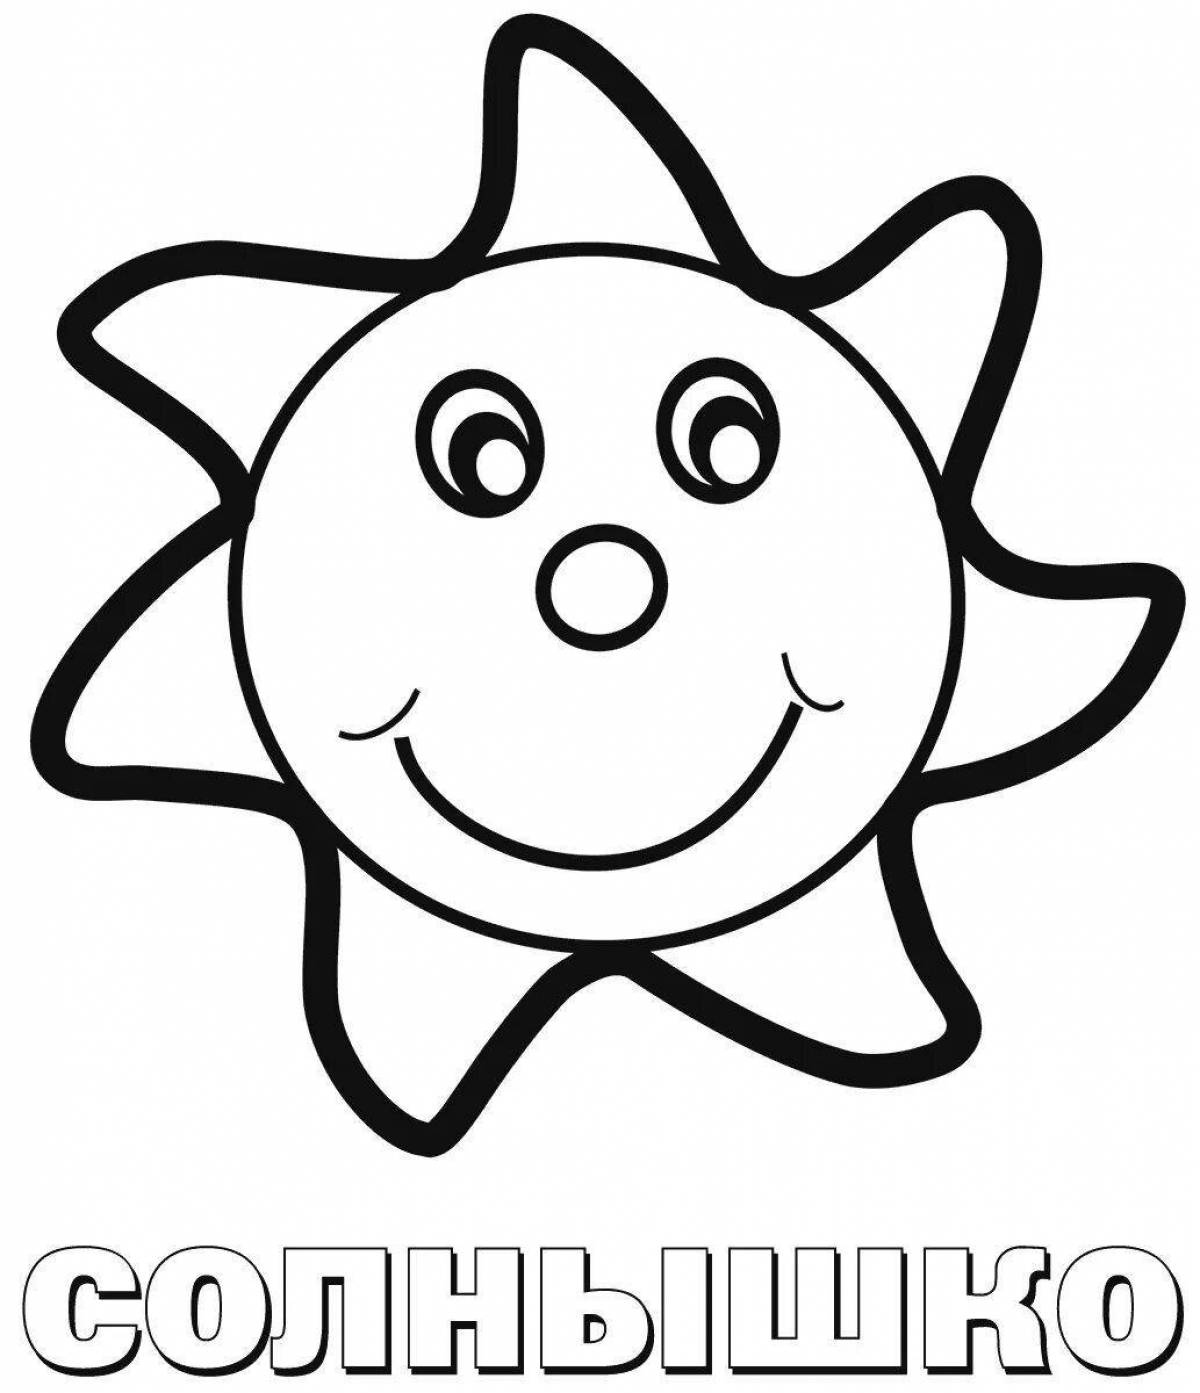 Great thick outline coloring book for toddlers